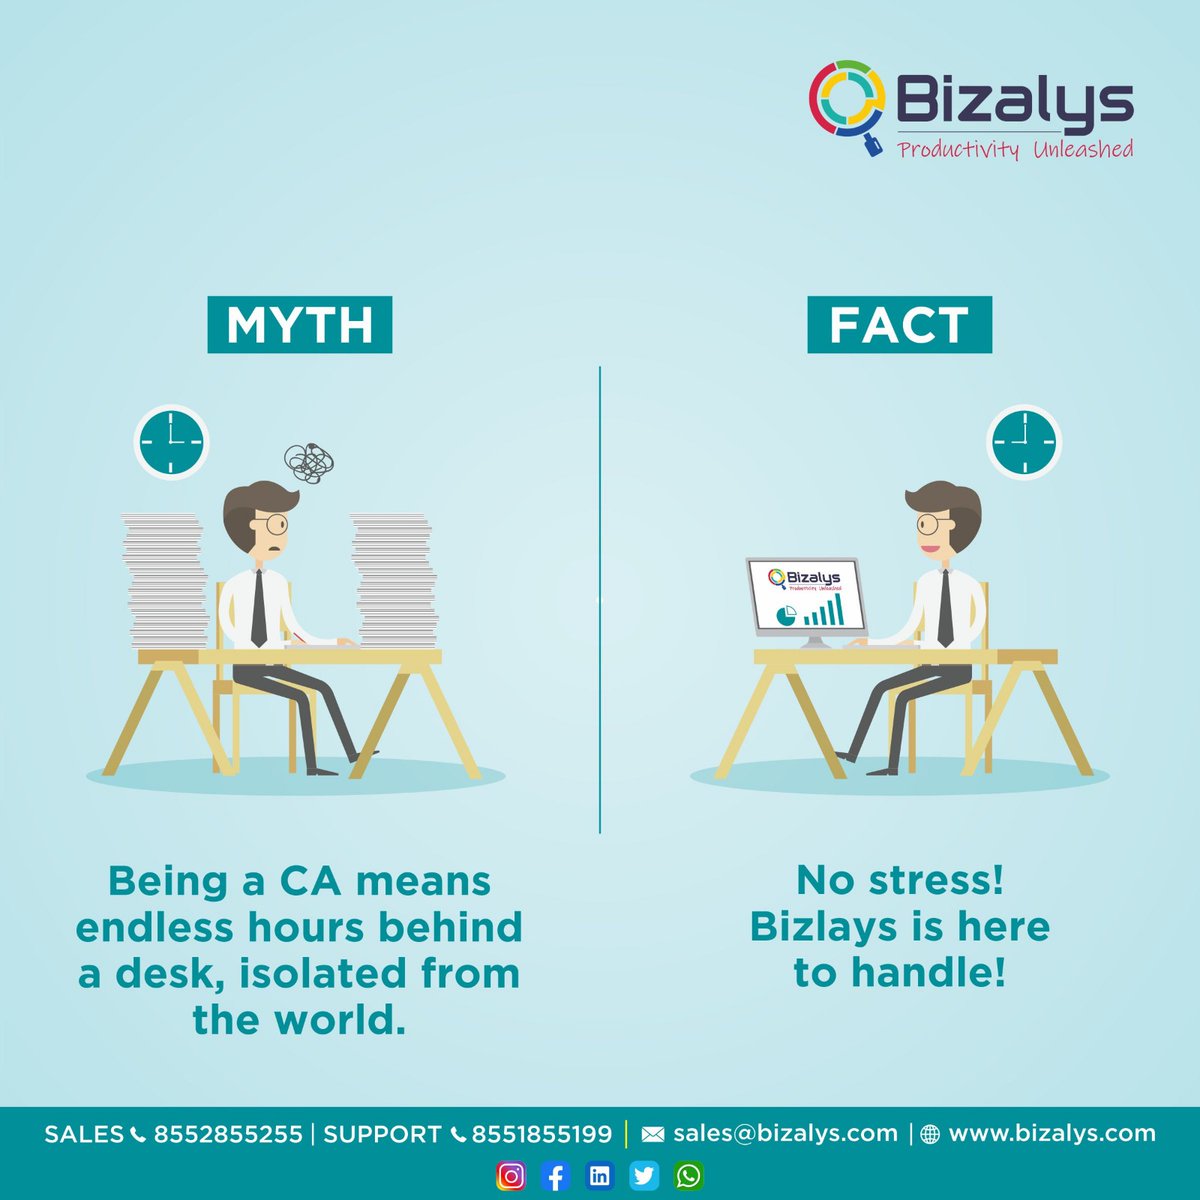 Are you curious about the intriguing world of a Chartered Accountant (CA)? Let's delve into the reality and bust some common myths! ✨

#mythsandfacts #mythbuster #TimeSavingSolutions #BusinessGrowth #OptimizeOperations #MaximizeProfitability #ClientSuccess #StayCompliant